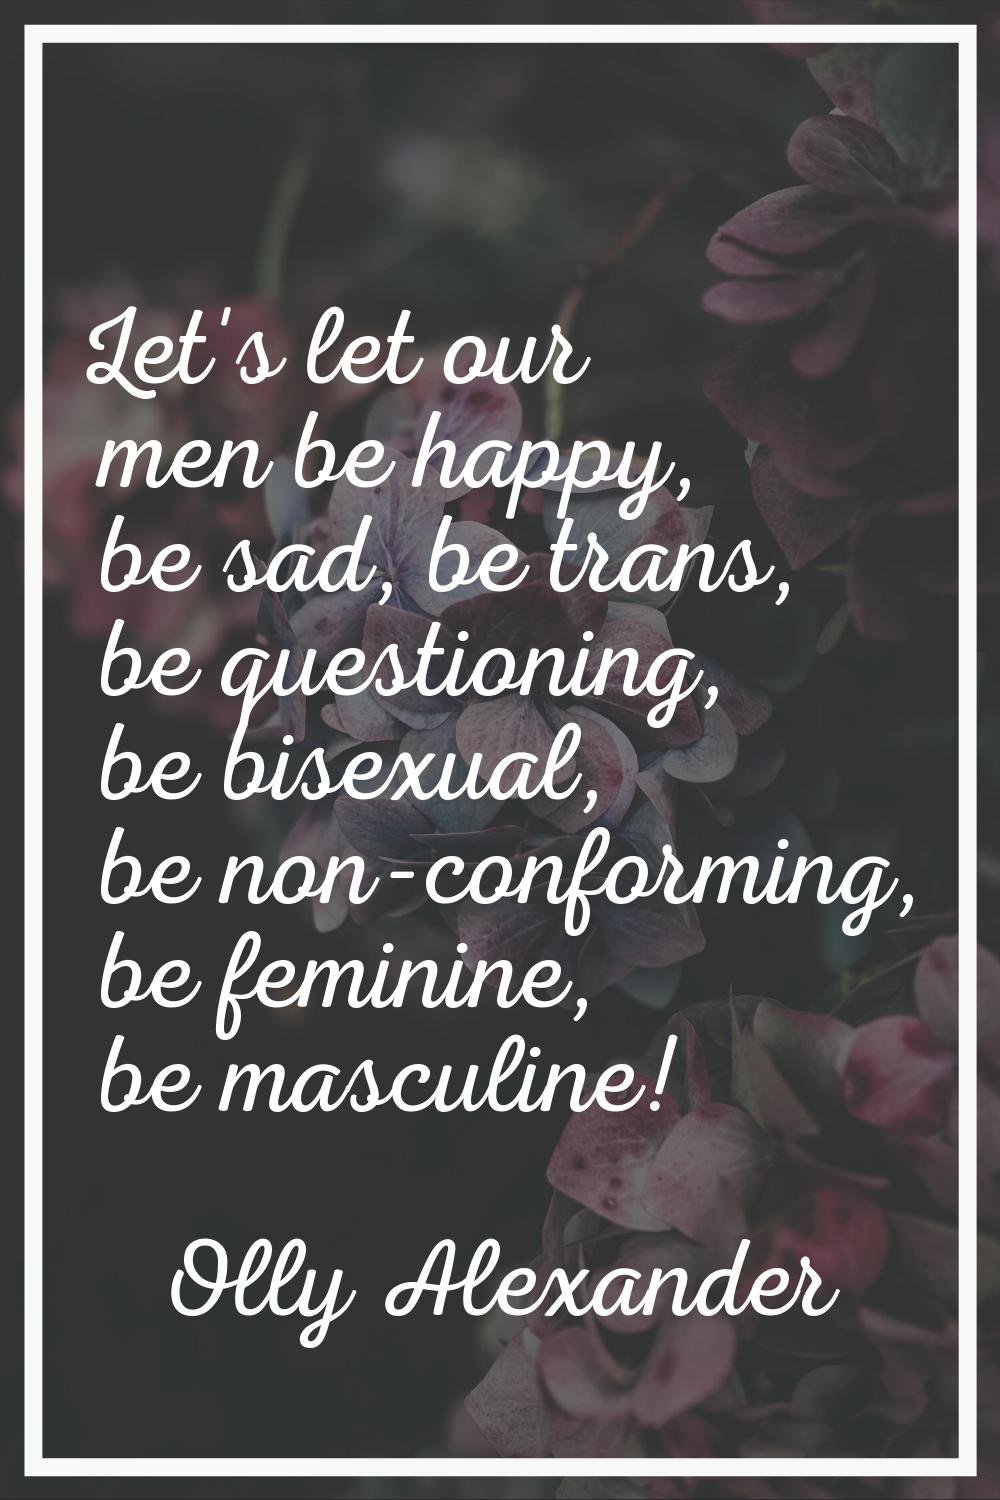 Let's let our men be happy, be sad, be trans, be questioning, be bisexual, be non-conforming, be fe